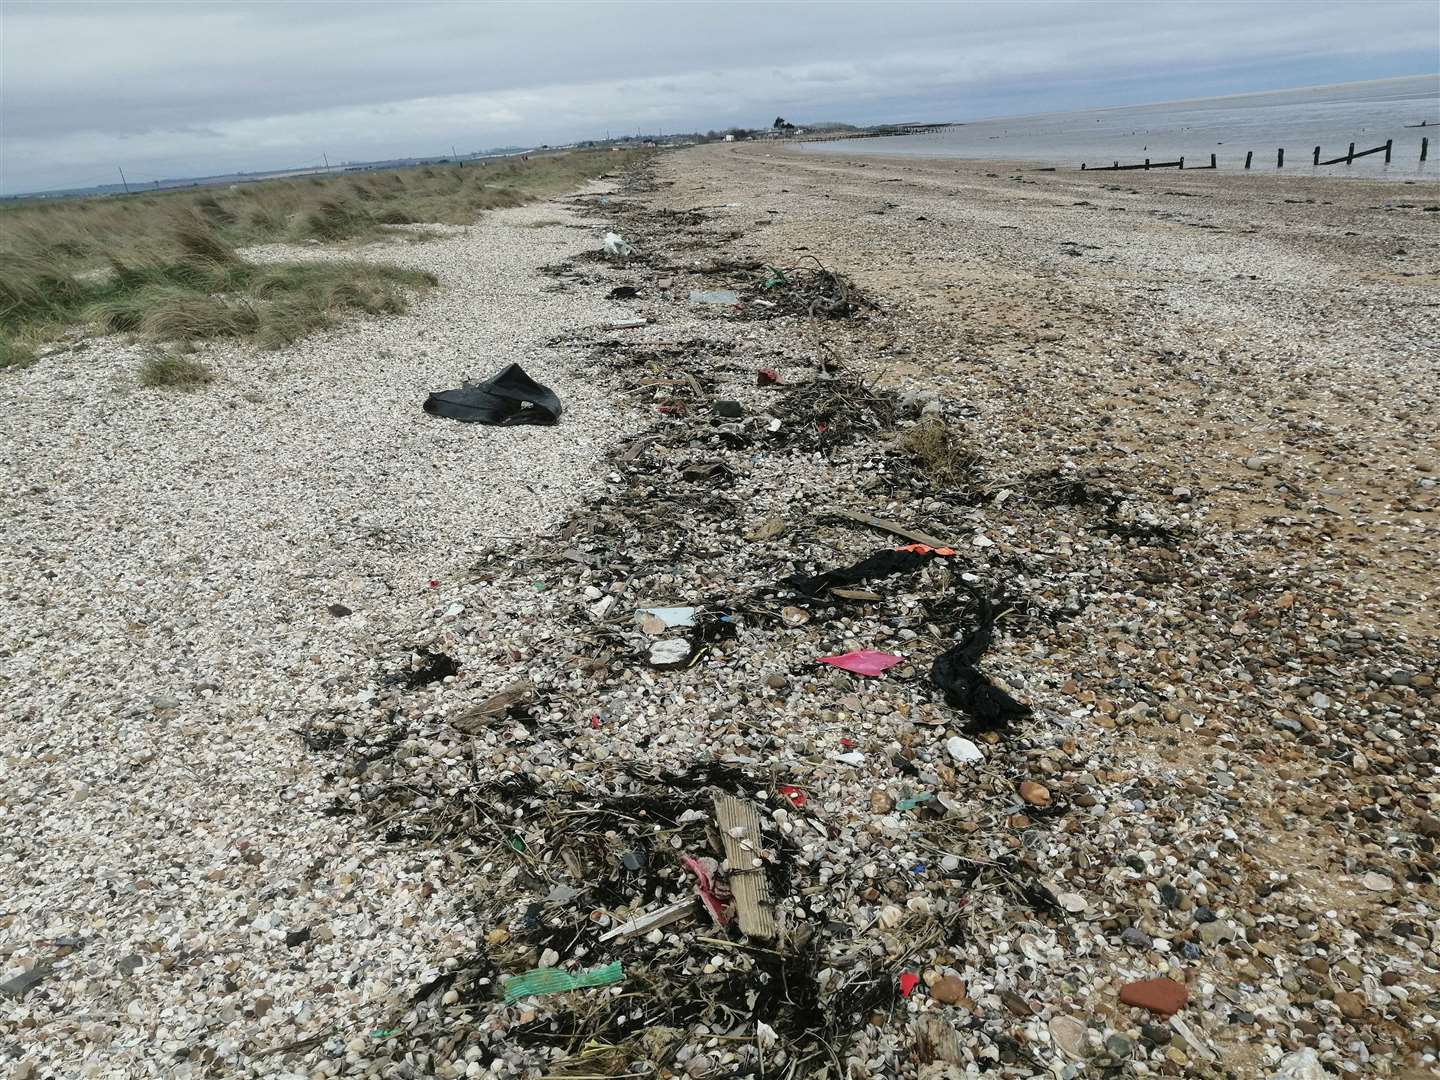 Mia Newbury picks up plastic that has washed up on the beach every time she goes out